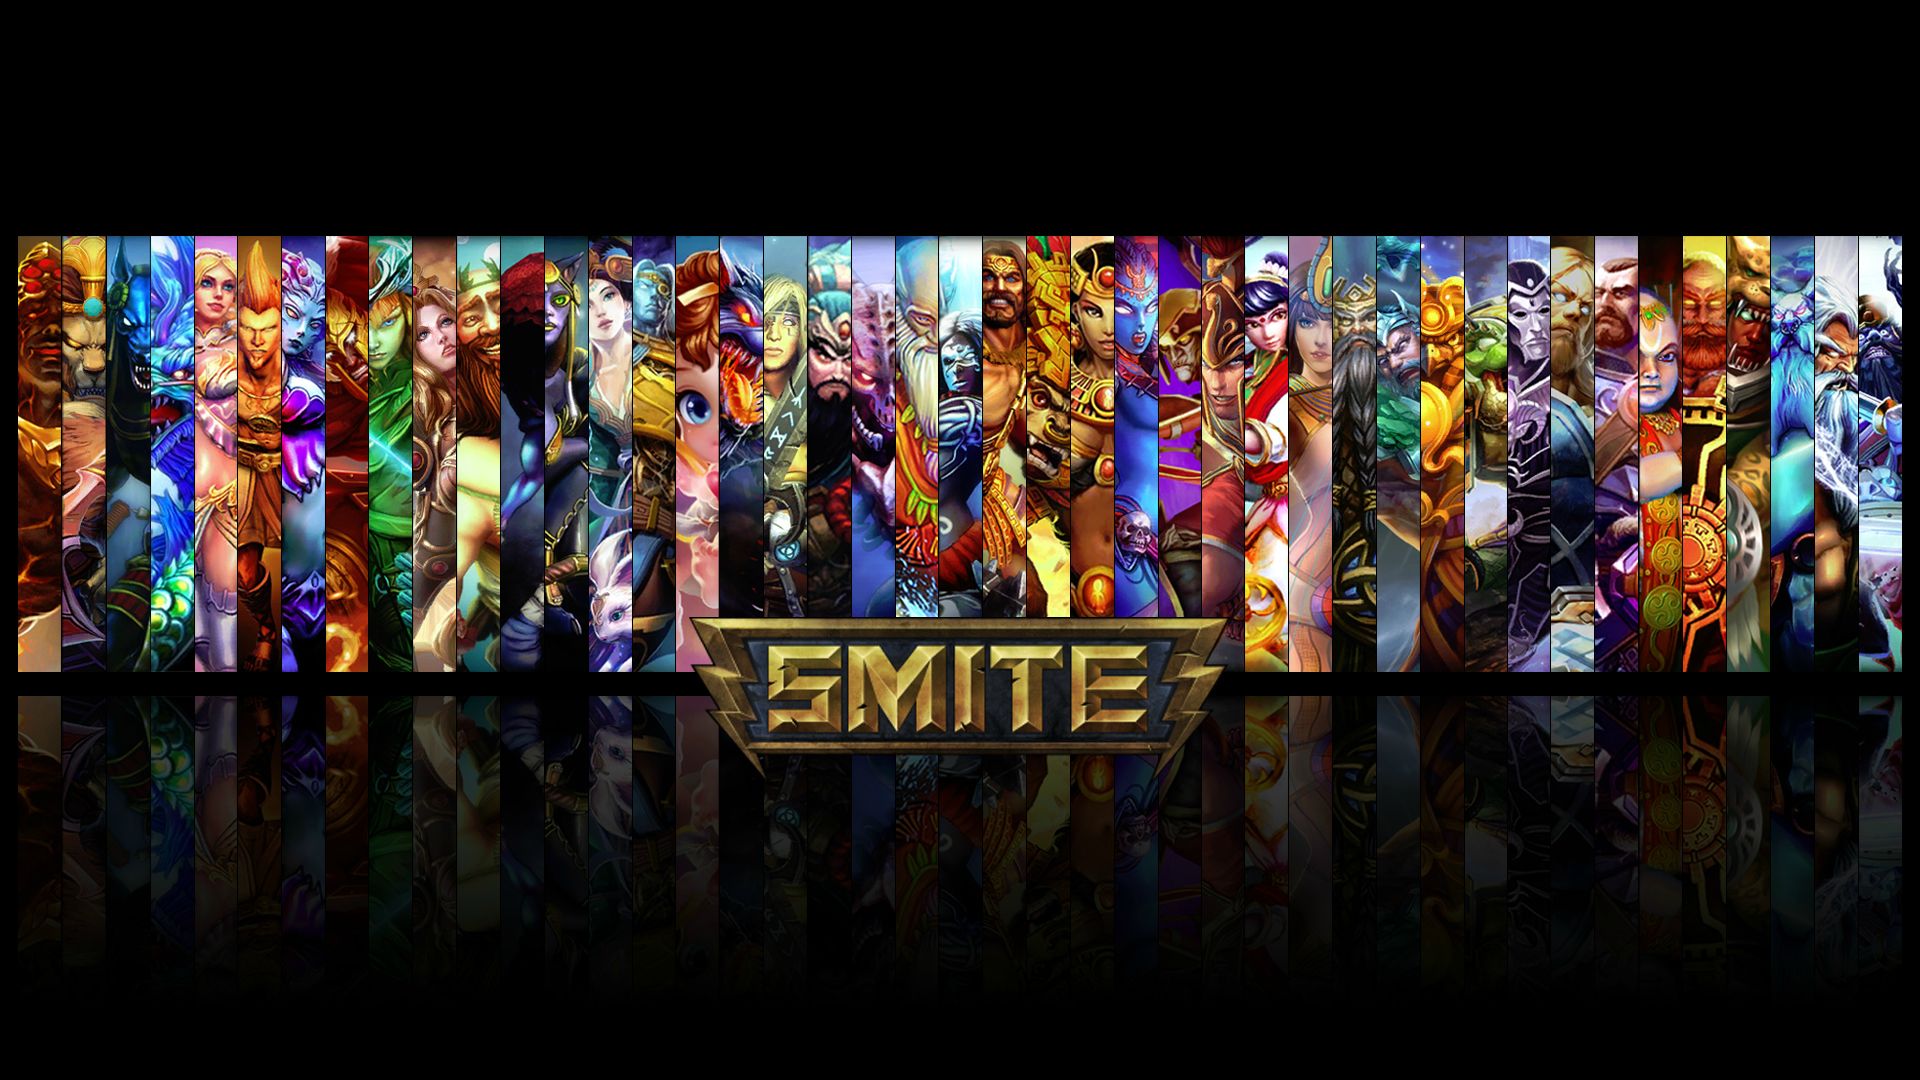 Smite Wallpaper with All Gods will keep updated Smite Forums